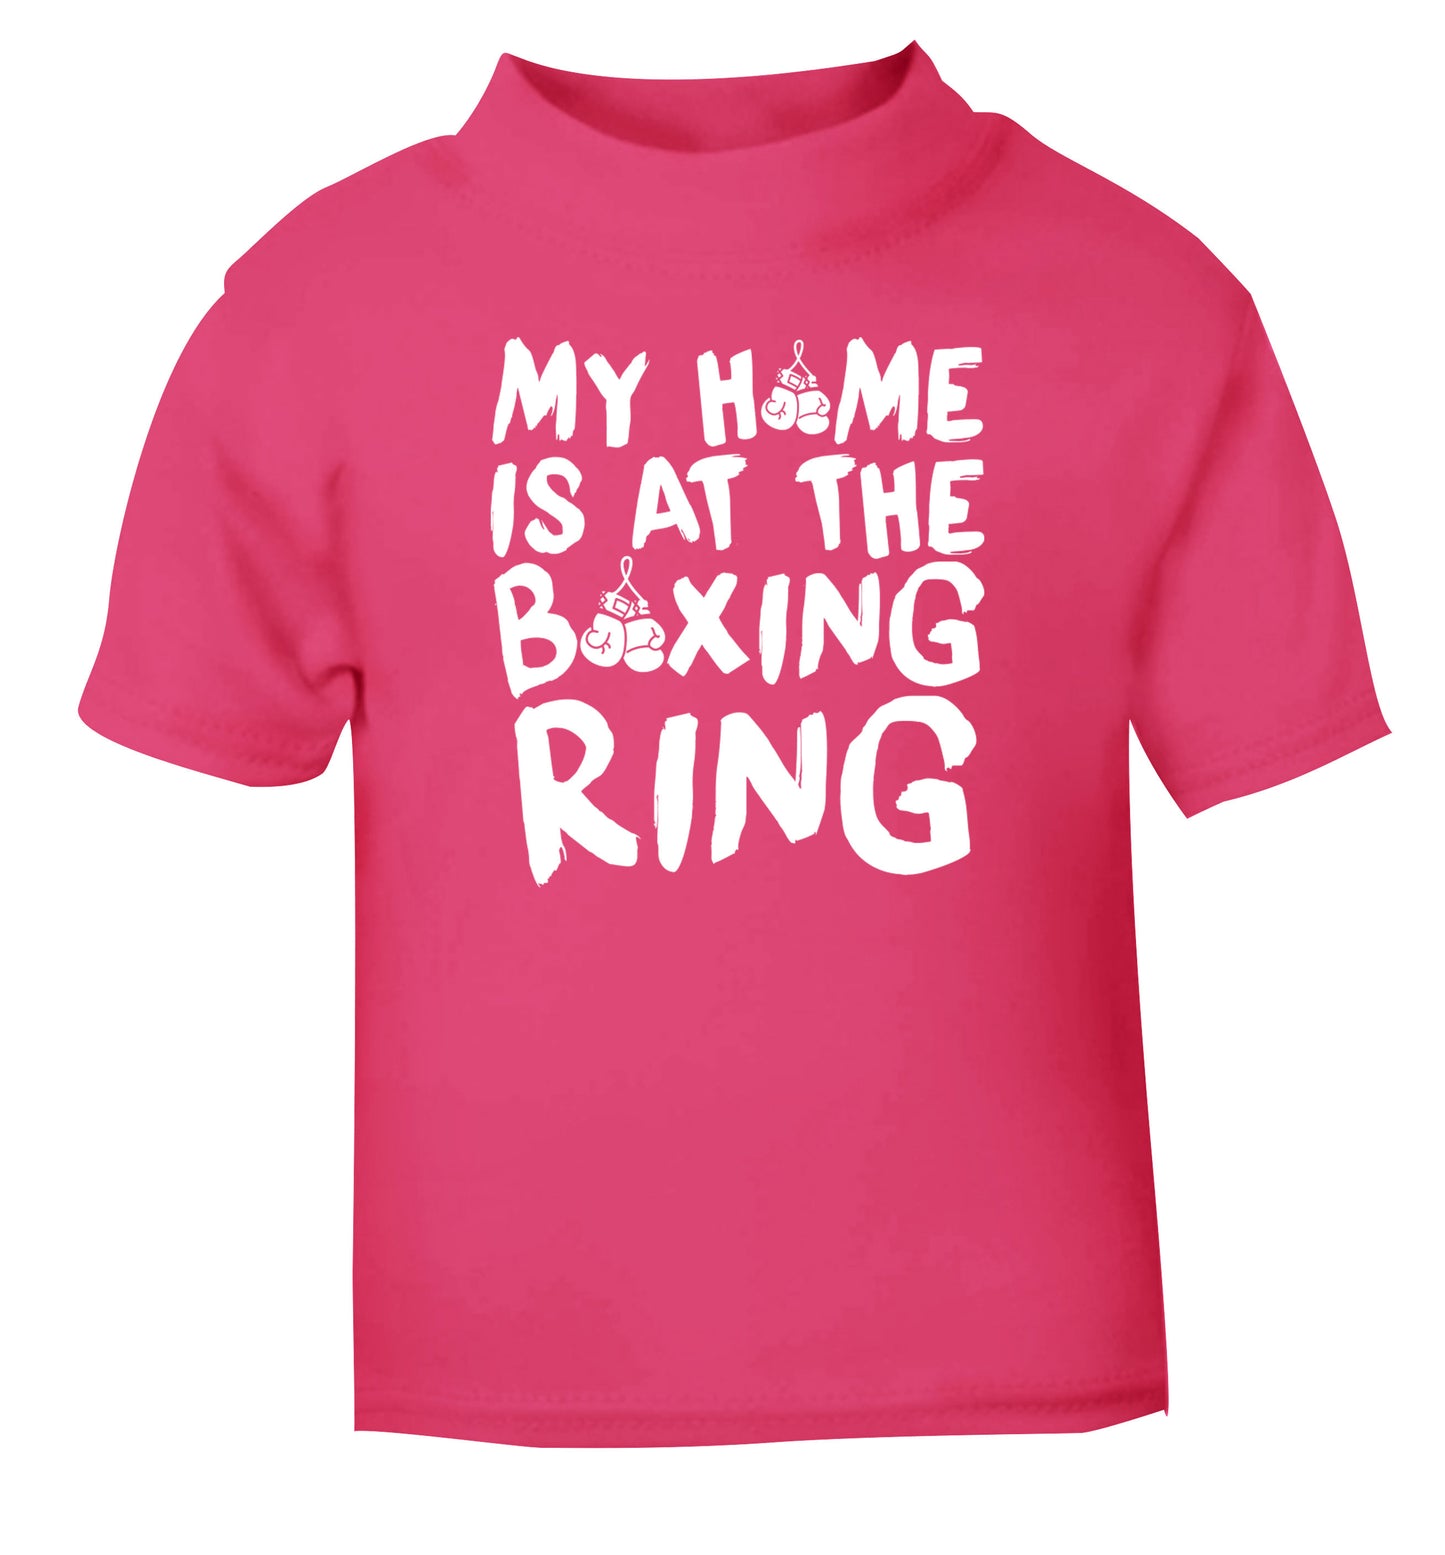 My home is at the boxing ring pink Baby Toddler Tshirt 2 Years